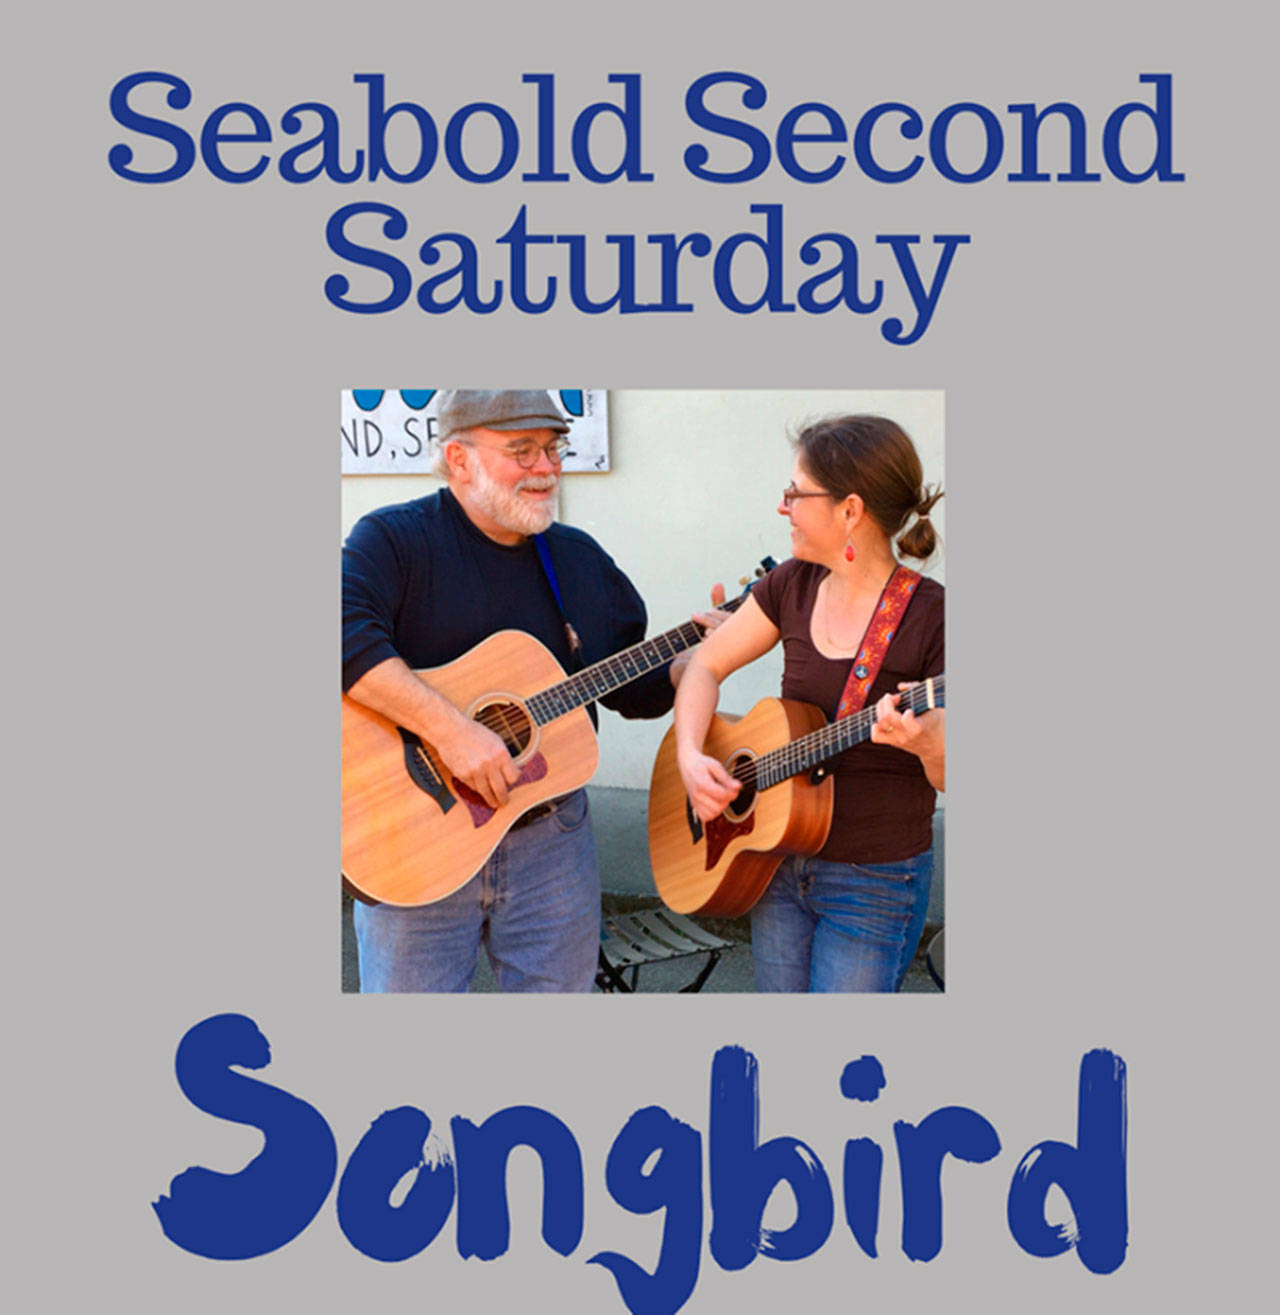 Songbird sings at Seabold on Second Saturday